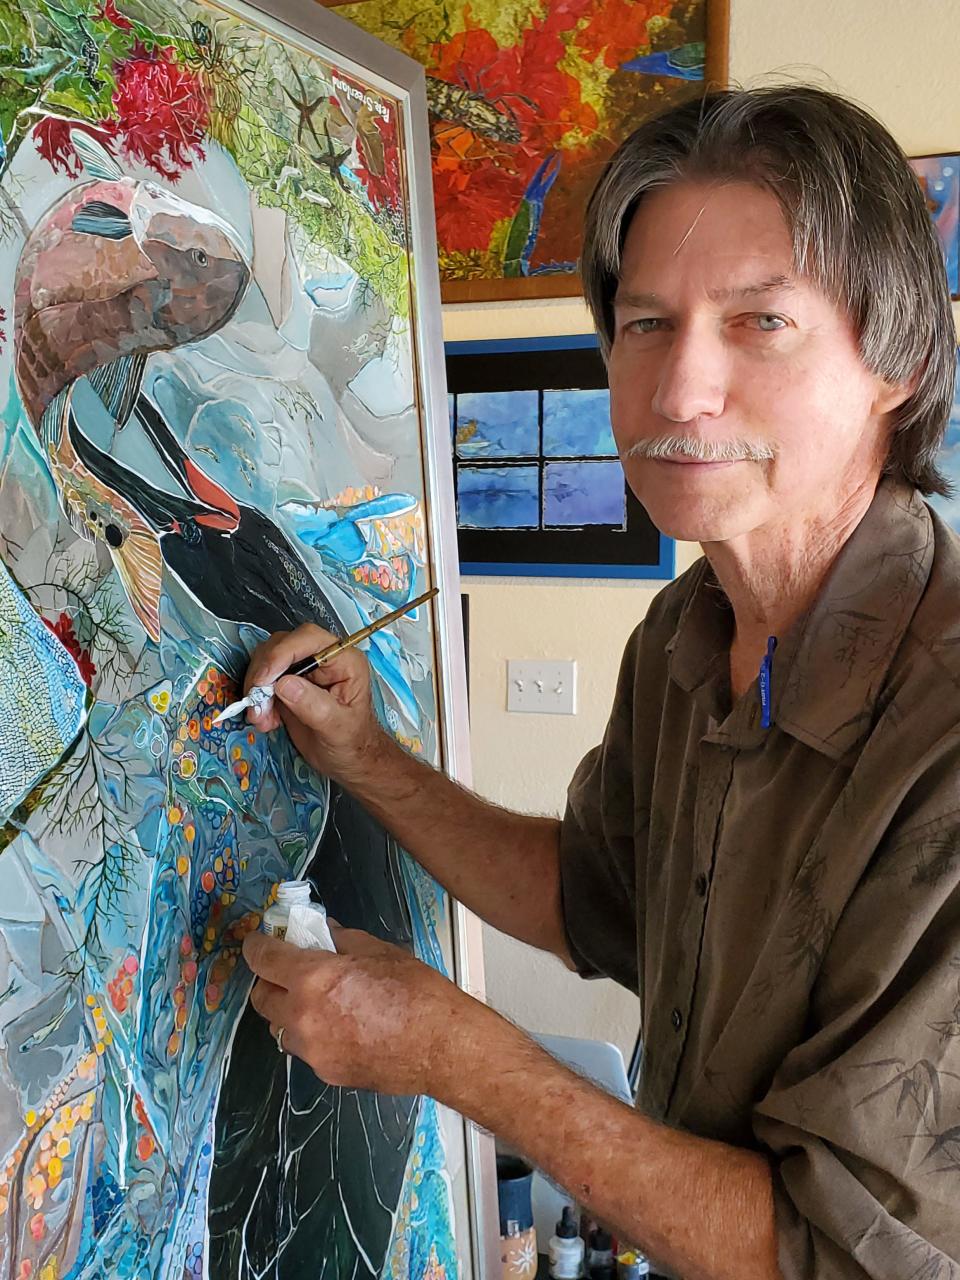 Artist Pete Steenland's "Floridian Flora & Fauna" exhibit will kick off with an opening reception at Studios of Cocoa Beach on April 5.